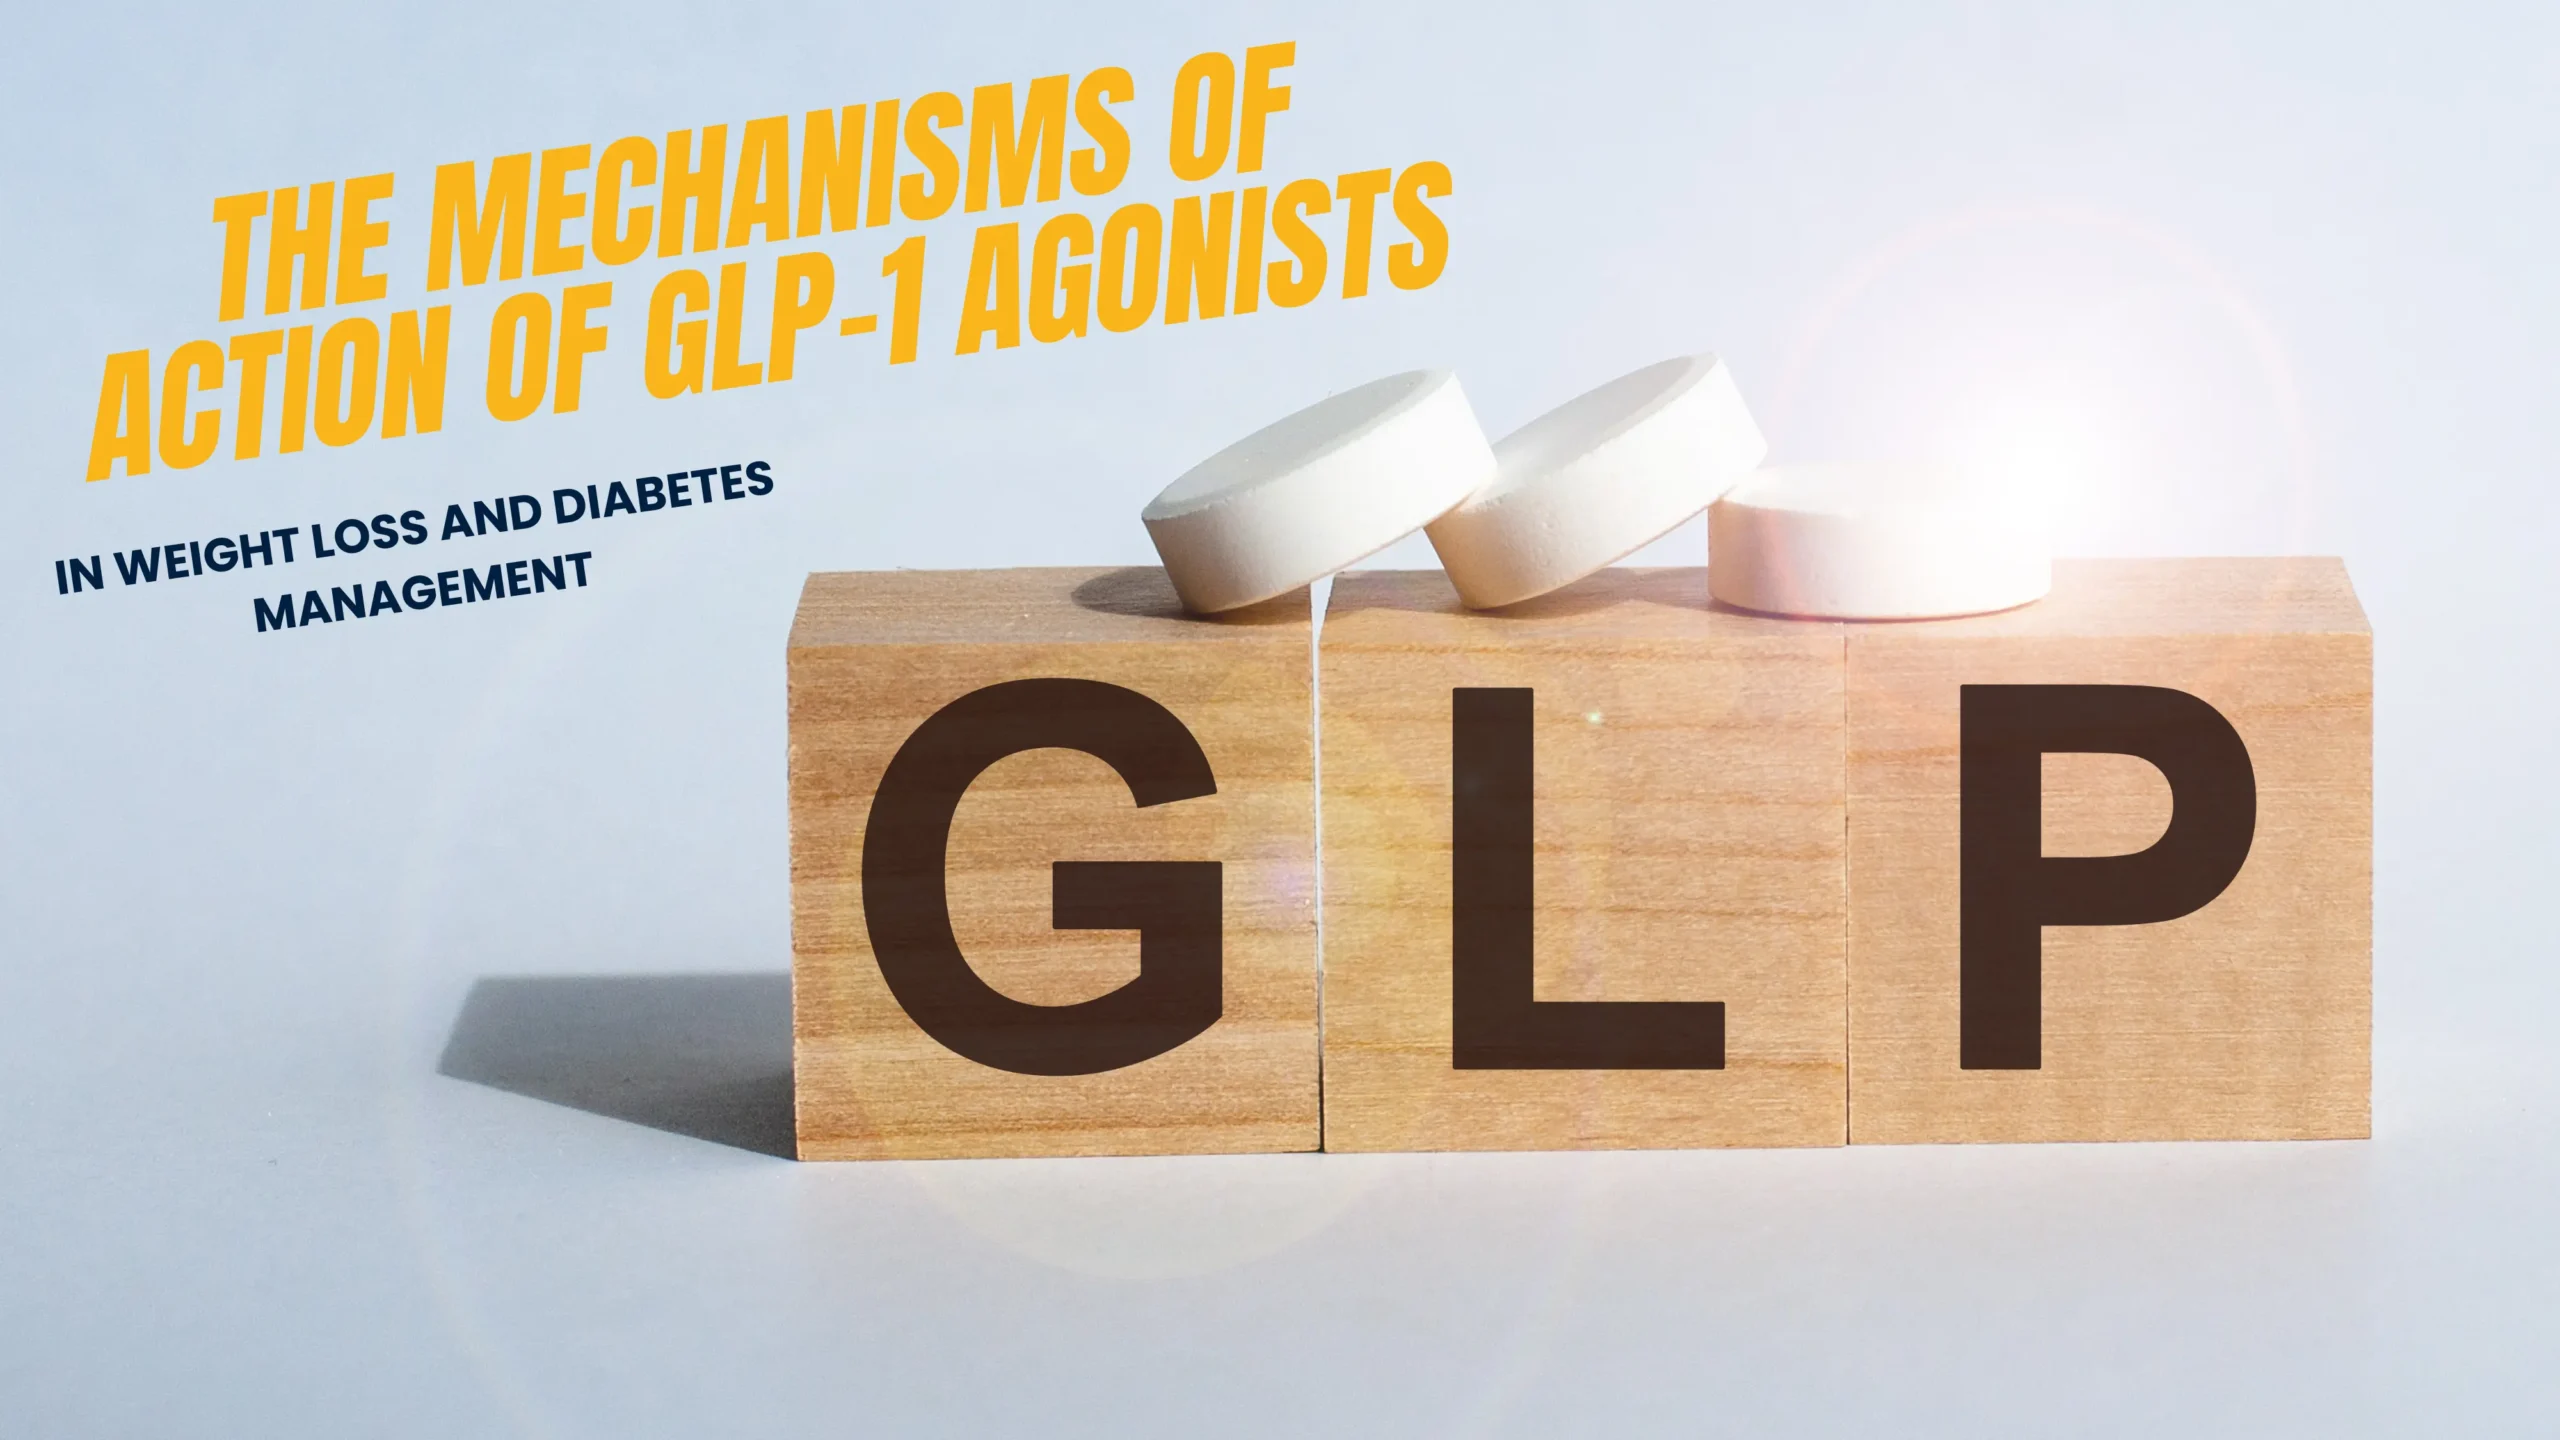 The Mechanisms of Action of GLP-1 Agonists in Weight Loss and Diabetes Management